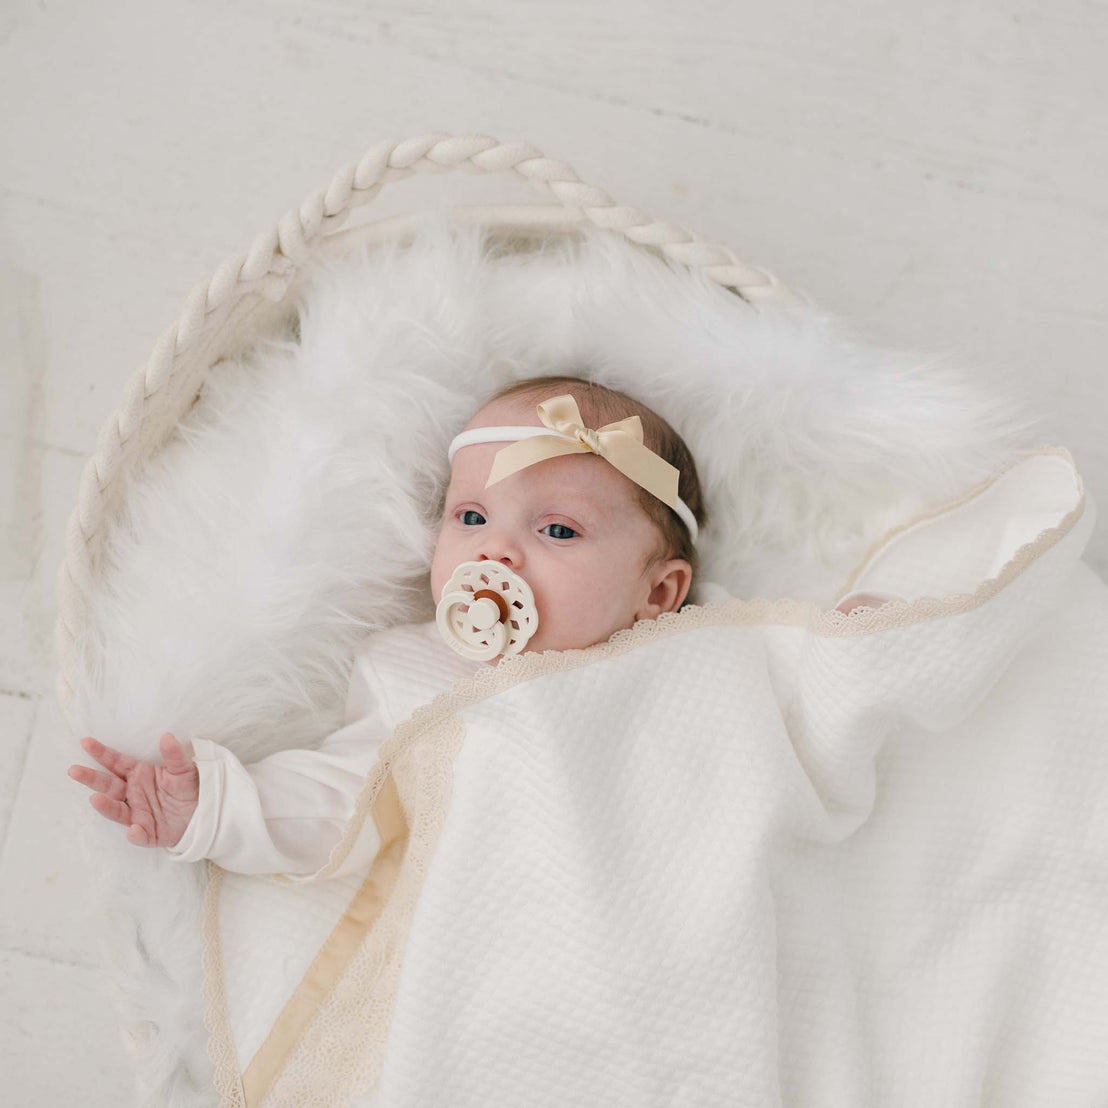 A baby wearing the Mia Bow Headband and using a pacifier lies cozily in a white basket wrapped in the Mia Personalized Blanket.